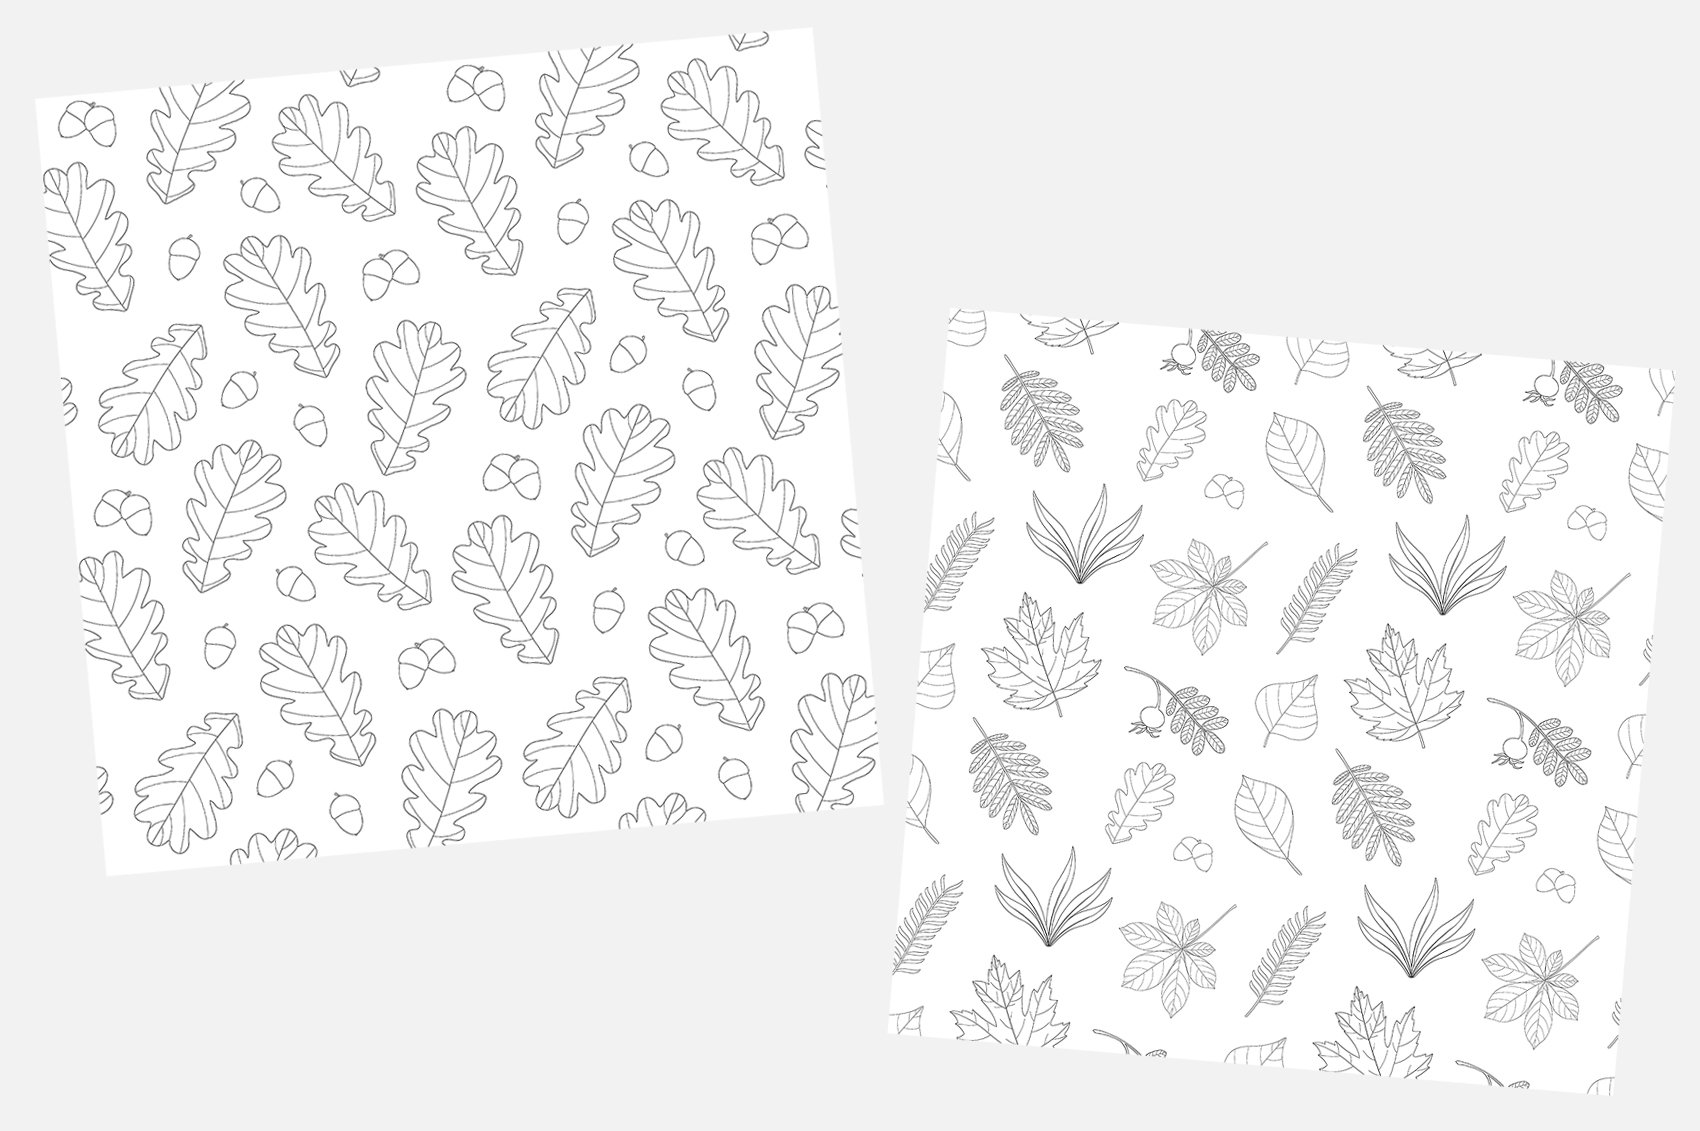 Autumn graphics pattern. Leaves SVG preview image.